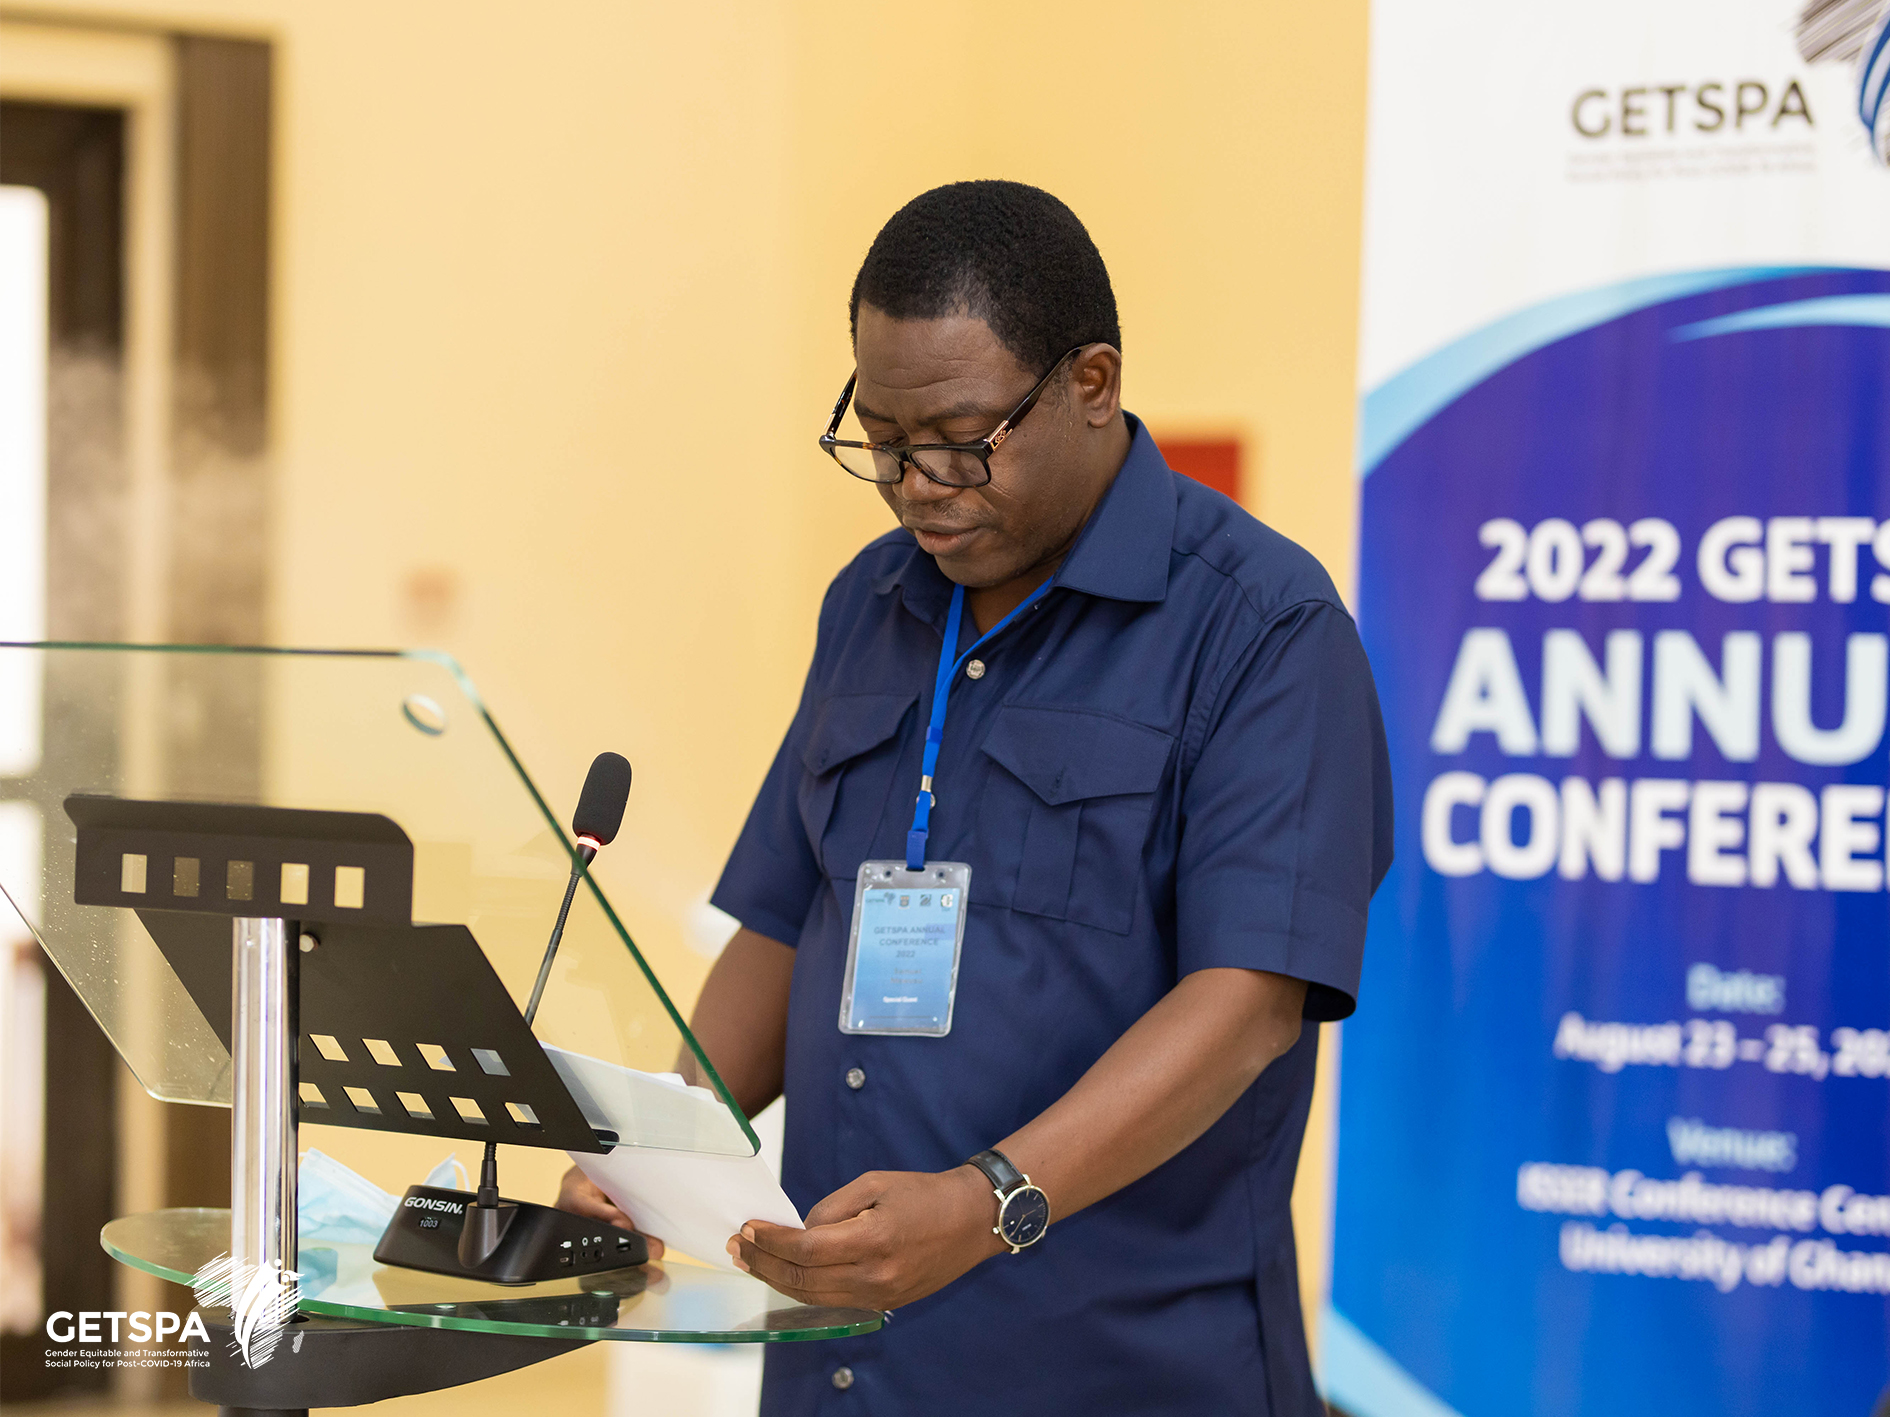 Prof. Ntewusu spoke at the event and moderated some sessions.